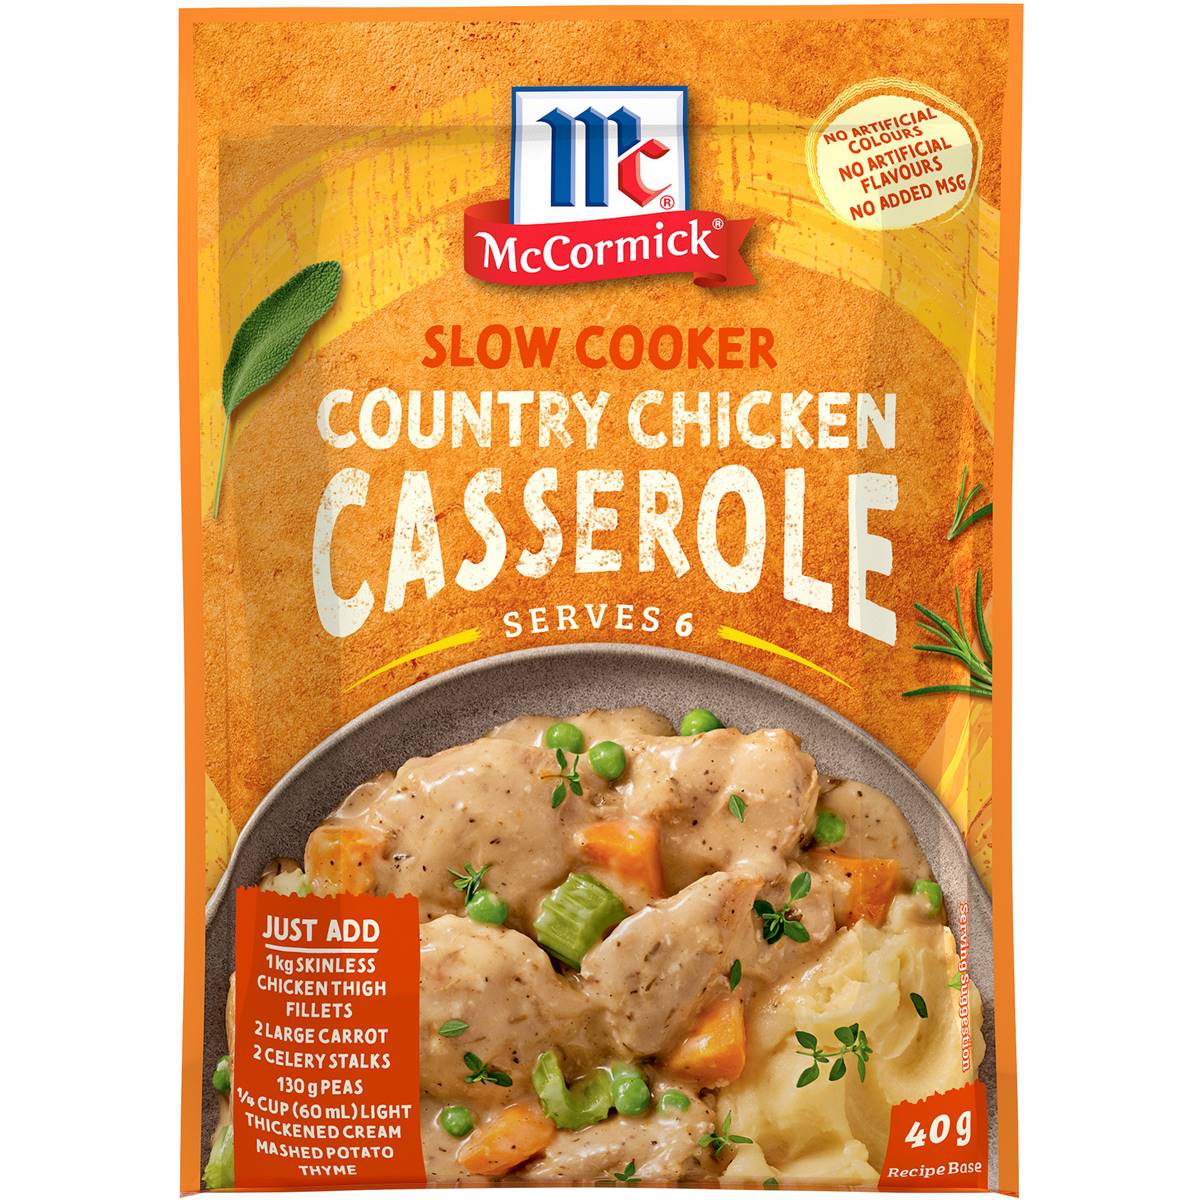 Calories in Mccormick Slow Cooker Country Chicken Casserole Recipe Base ...